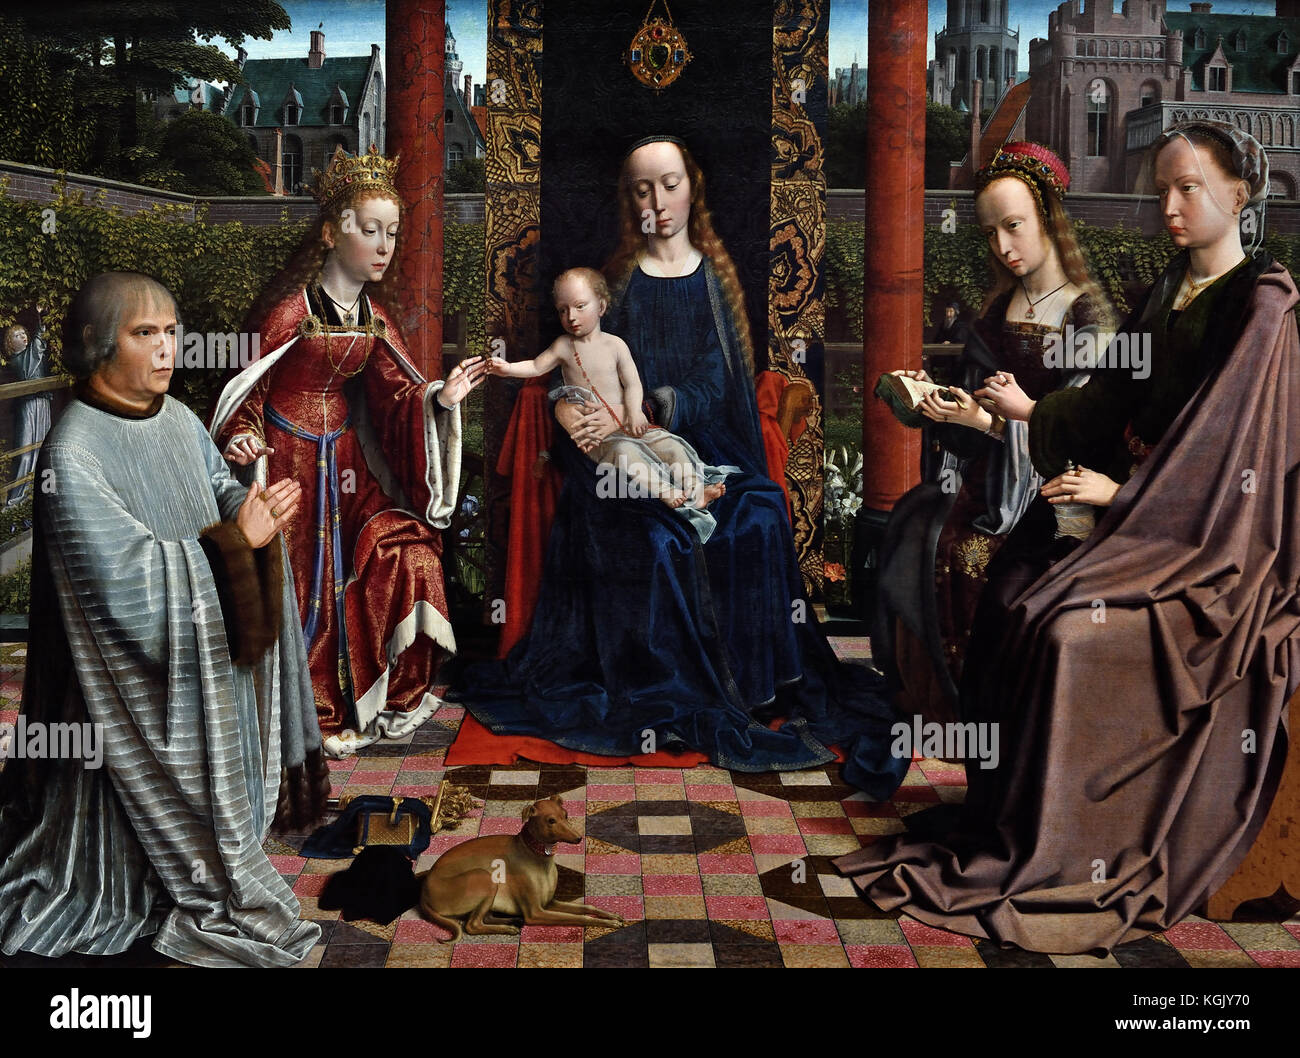 The Virgin and Child with Saints and Donor 1510 Gerard David  1460 – 1523 Early Netherlandish painter and manuscript illuminator known for his brilliant use of color ( The Netherlands, Dutch, Belgian, Belgium, Flemish ) Stock Photo